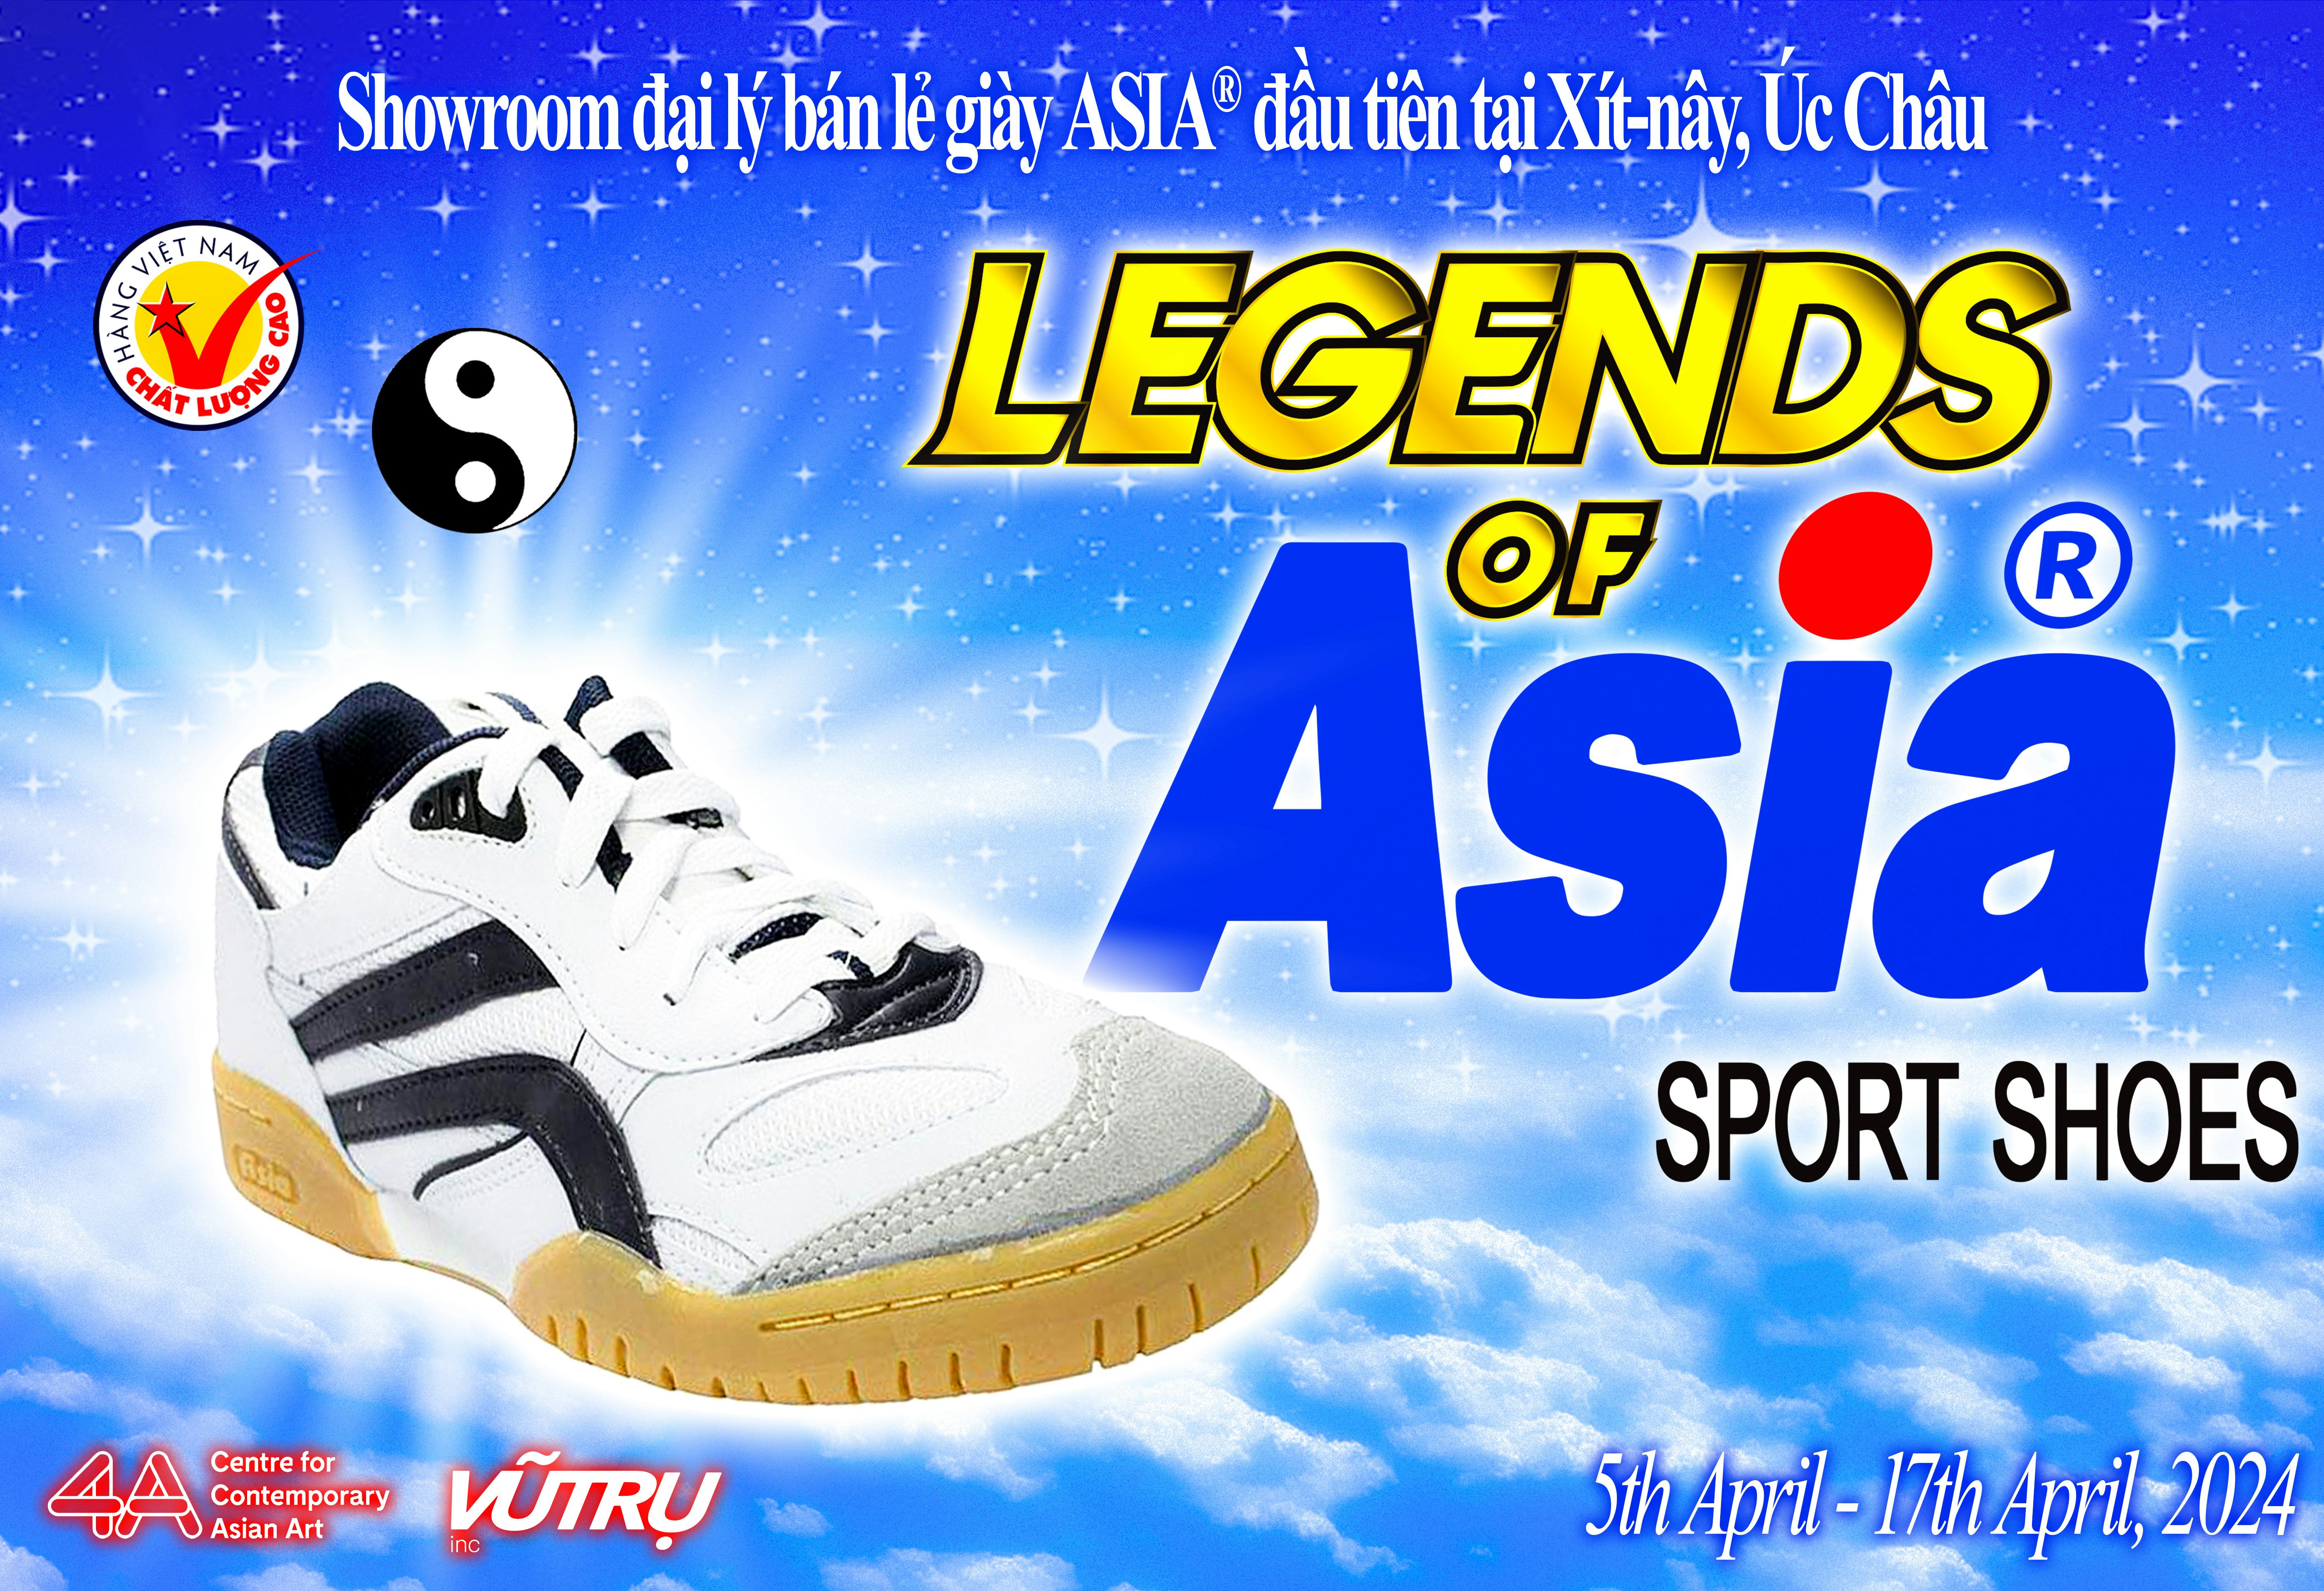 <p><span style="font-weight: 400;">LEGEND OF ASIA&reg; SPORT SHOES</span></p>